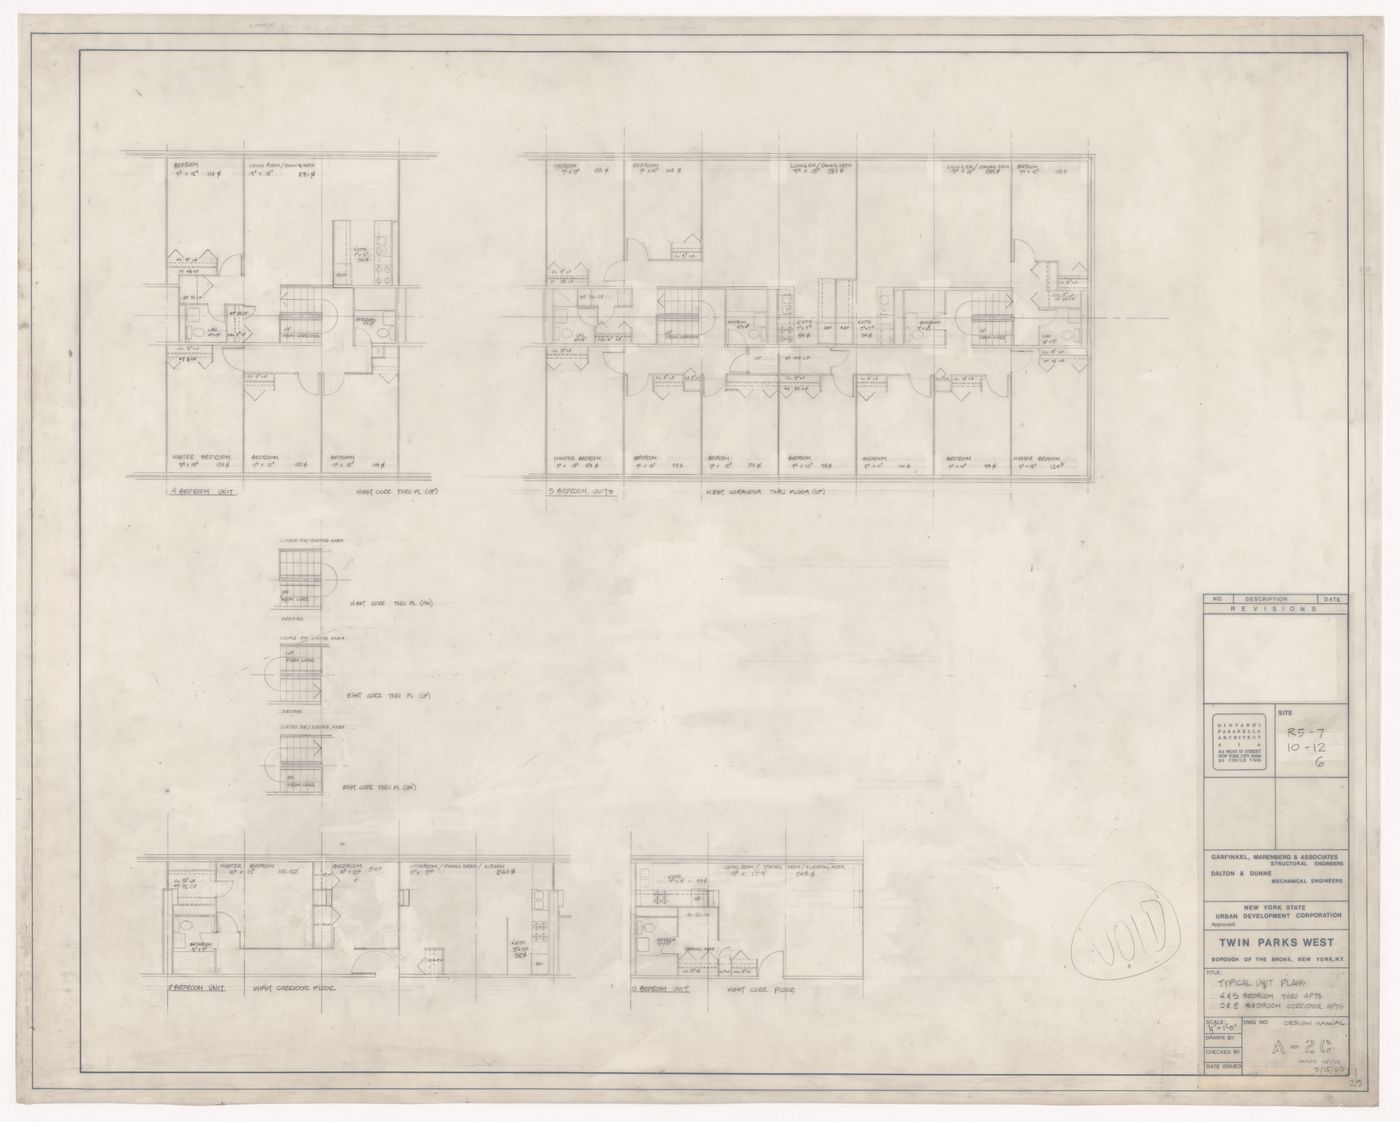 Typical unit plans for Twin Parks West, Sites R5-7, 10-12, 6, Bronx, New York